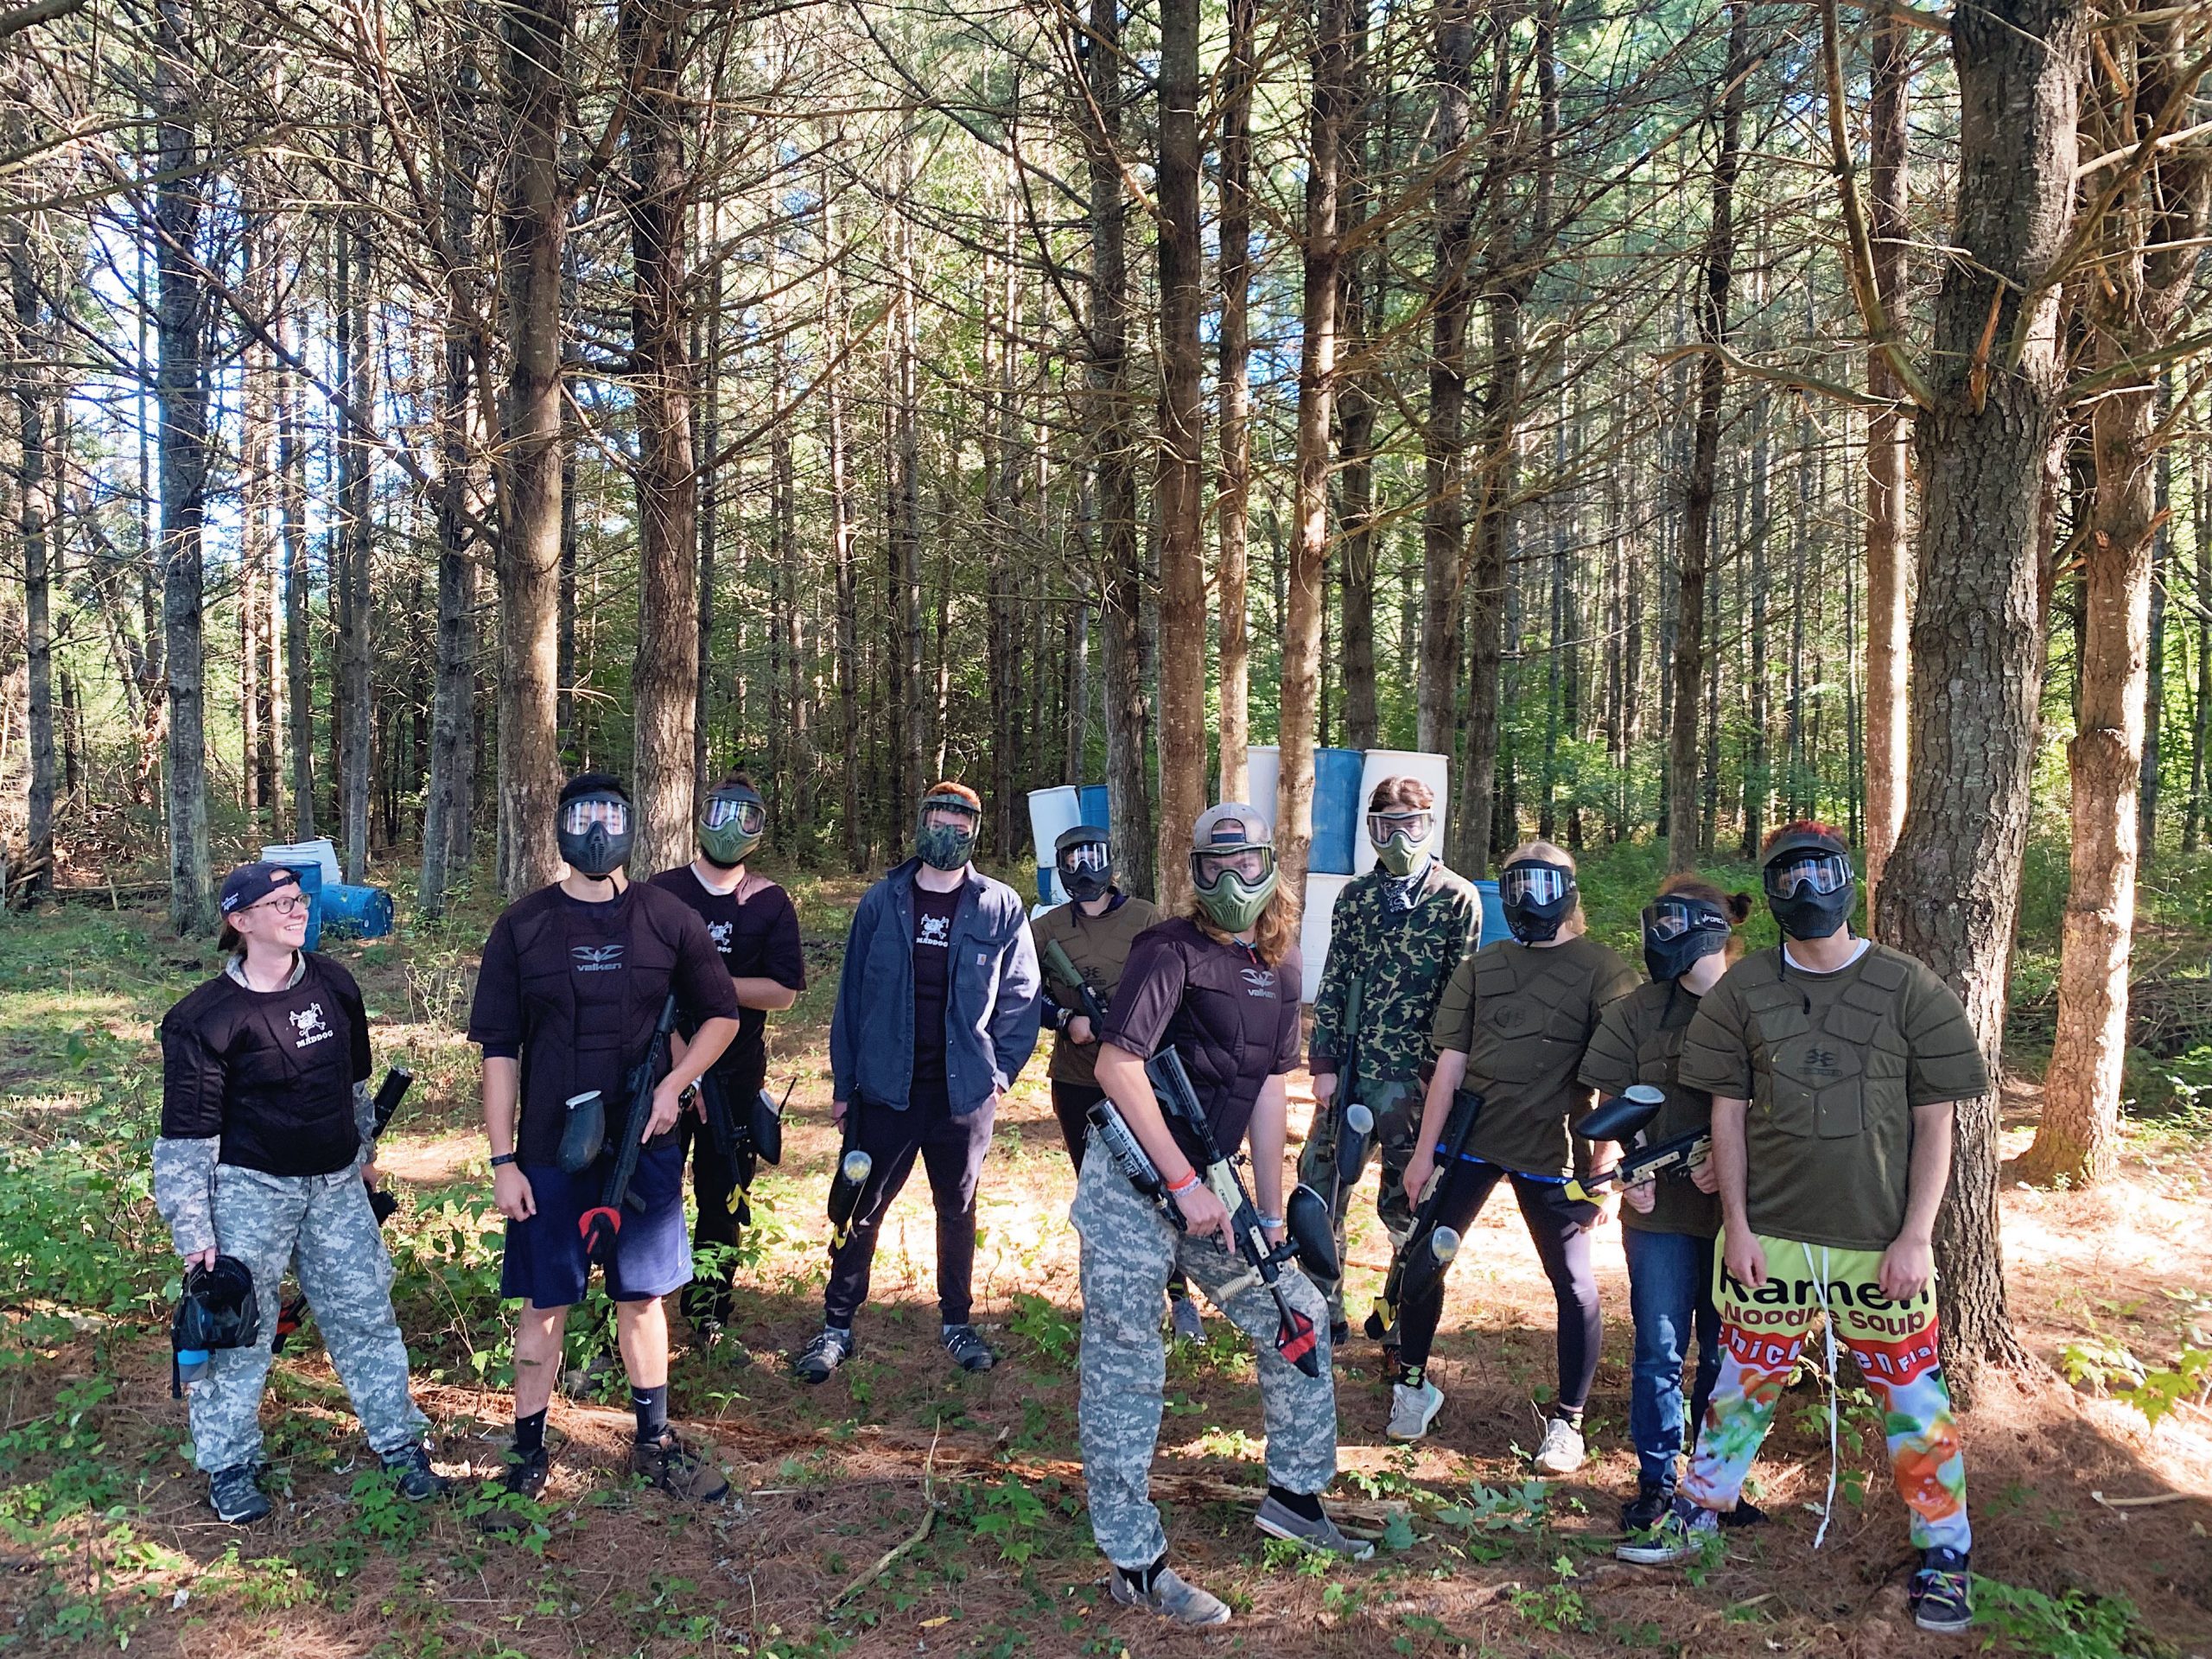 Paintball fun at the weekend